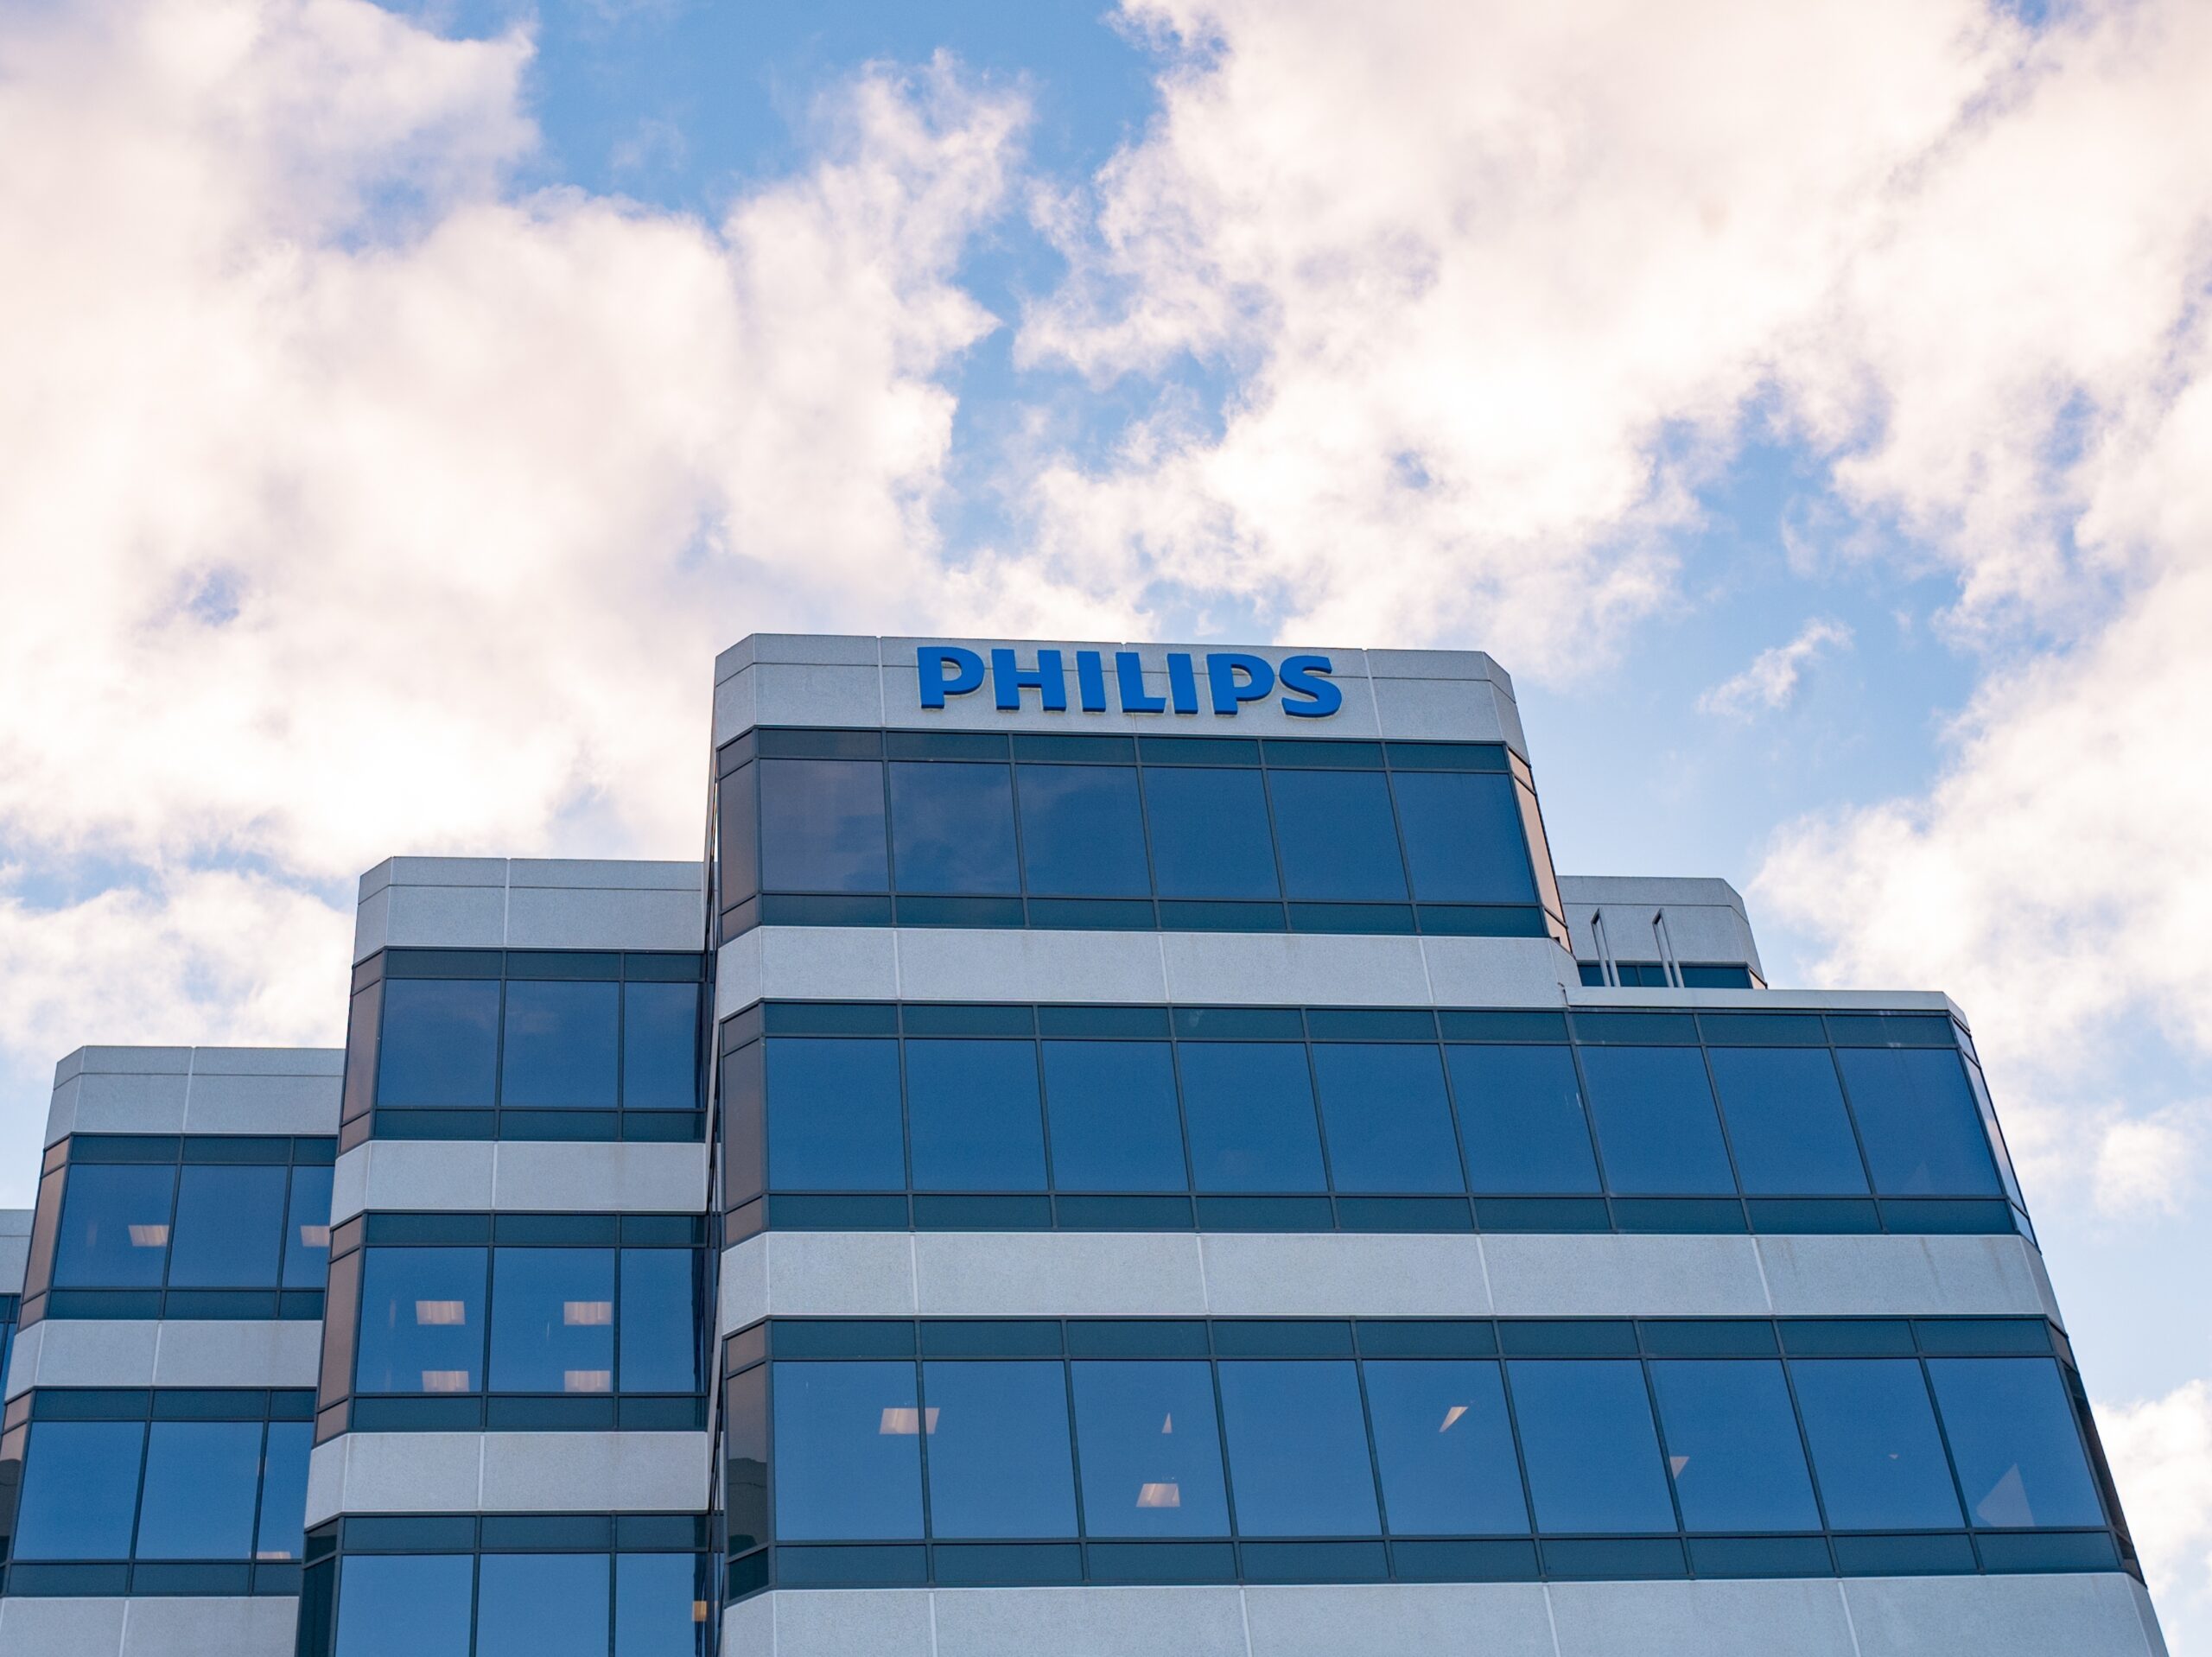 The medical device maker Philips has agreed to a $1.1 billion settlement to address claims brought by thousands of people with sleep apnea who say they were injured by the company's CPAP machines.